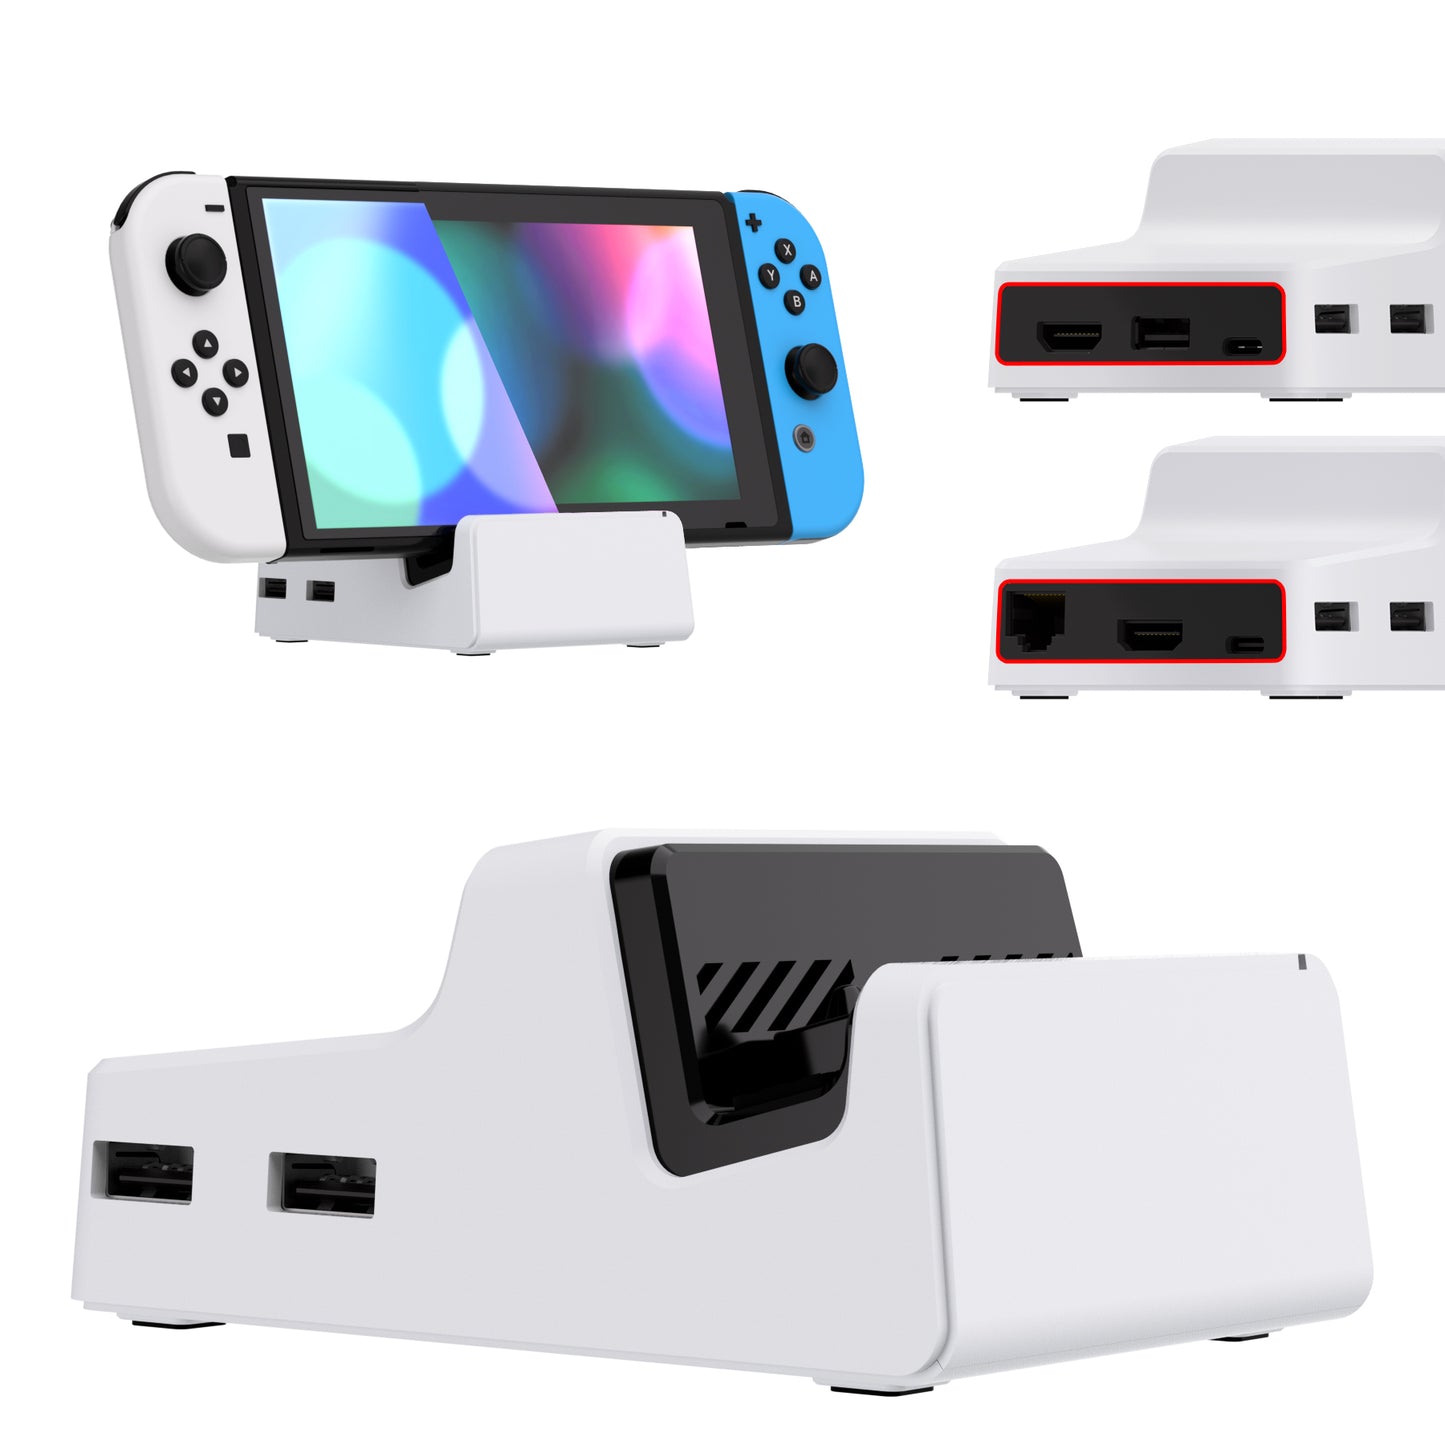 eXtremeRate Retail eXtremeRate AiryDocky DIY Kit White Replacement Case for Nintendo Switch Dock, Redesigned Portable Mini Dock Shell Cover for Nintendo Switch OLED - Shells Only, Dock & Circuit Board NOT Included - LLNSM003